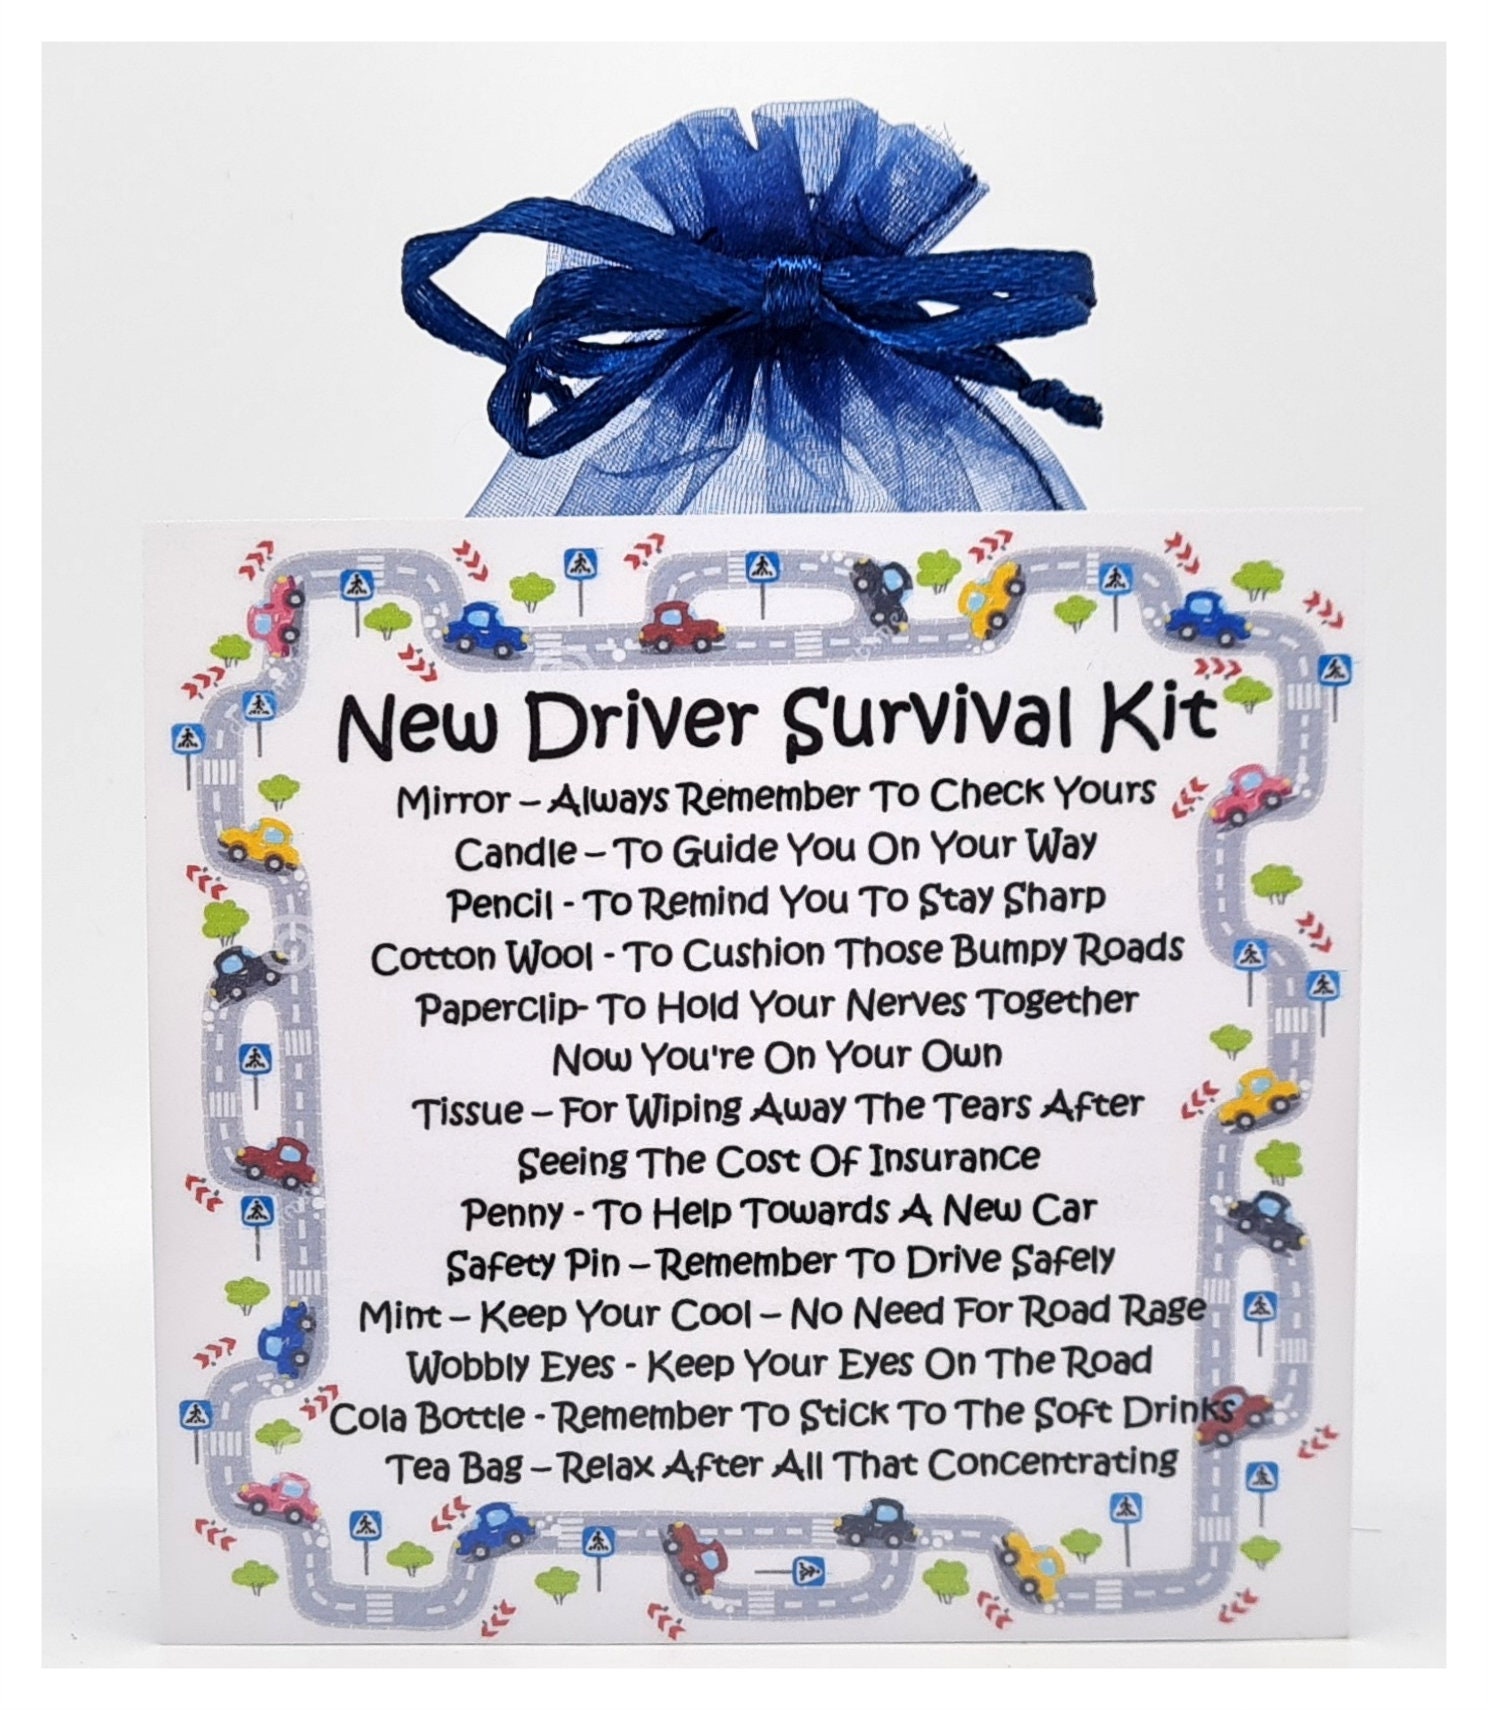 43 Gift Ideas for Truck Drivers They're Sure To Love  Truck driver gifts, Truck  driver, Gifts for truckers